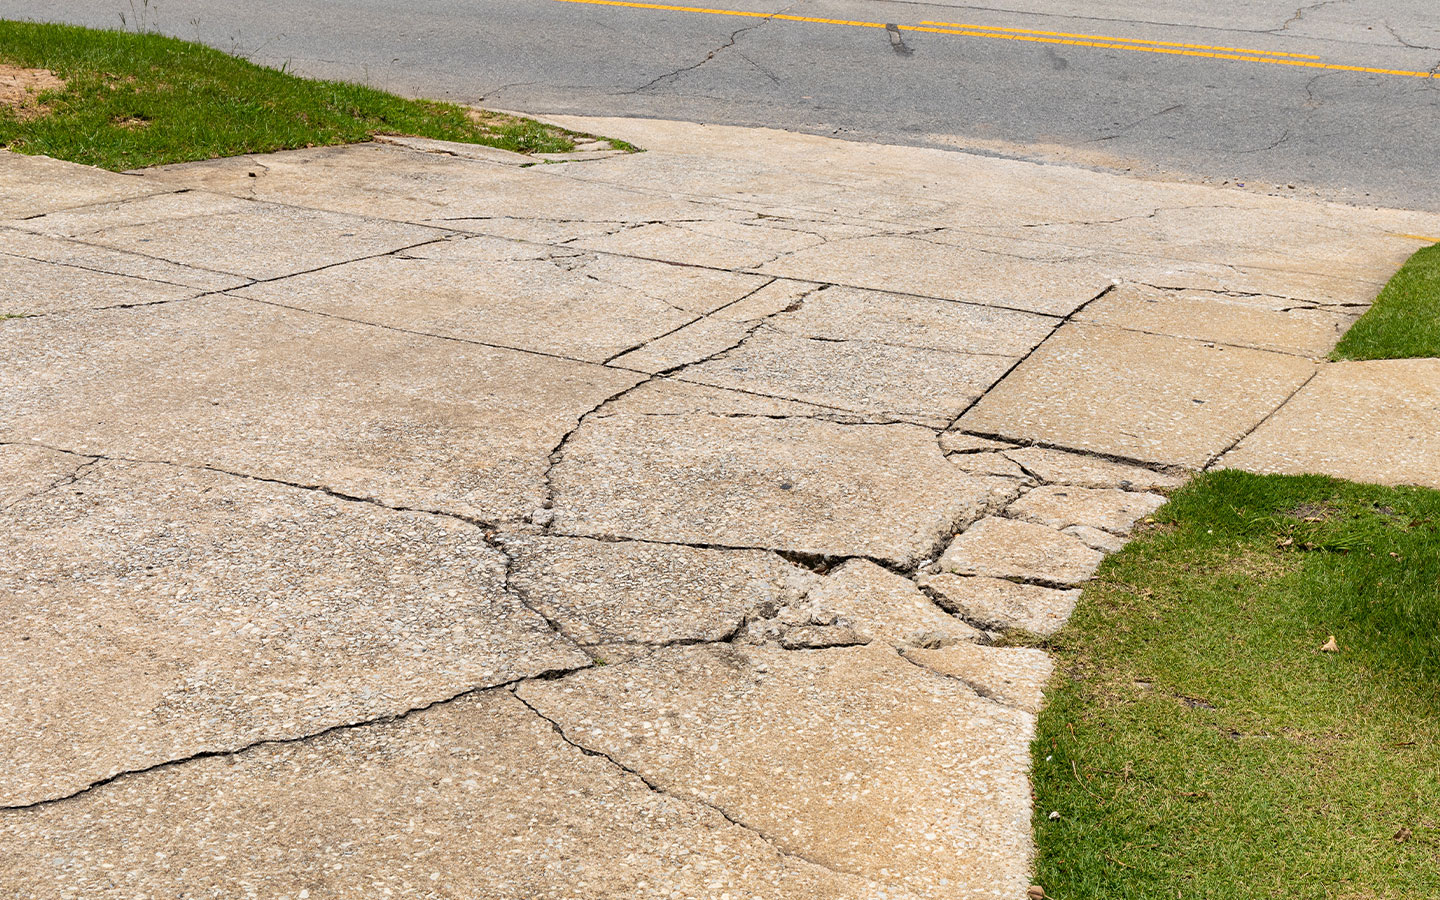 normal issues like driveway cracks don't contribute much to the resale value